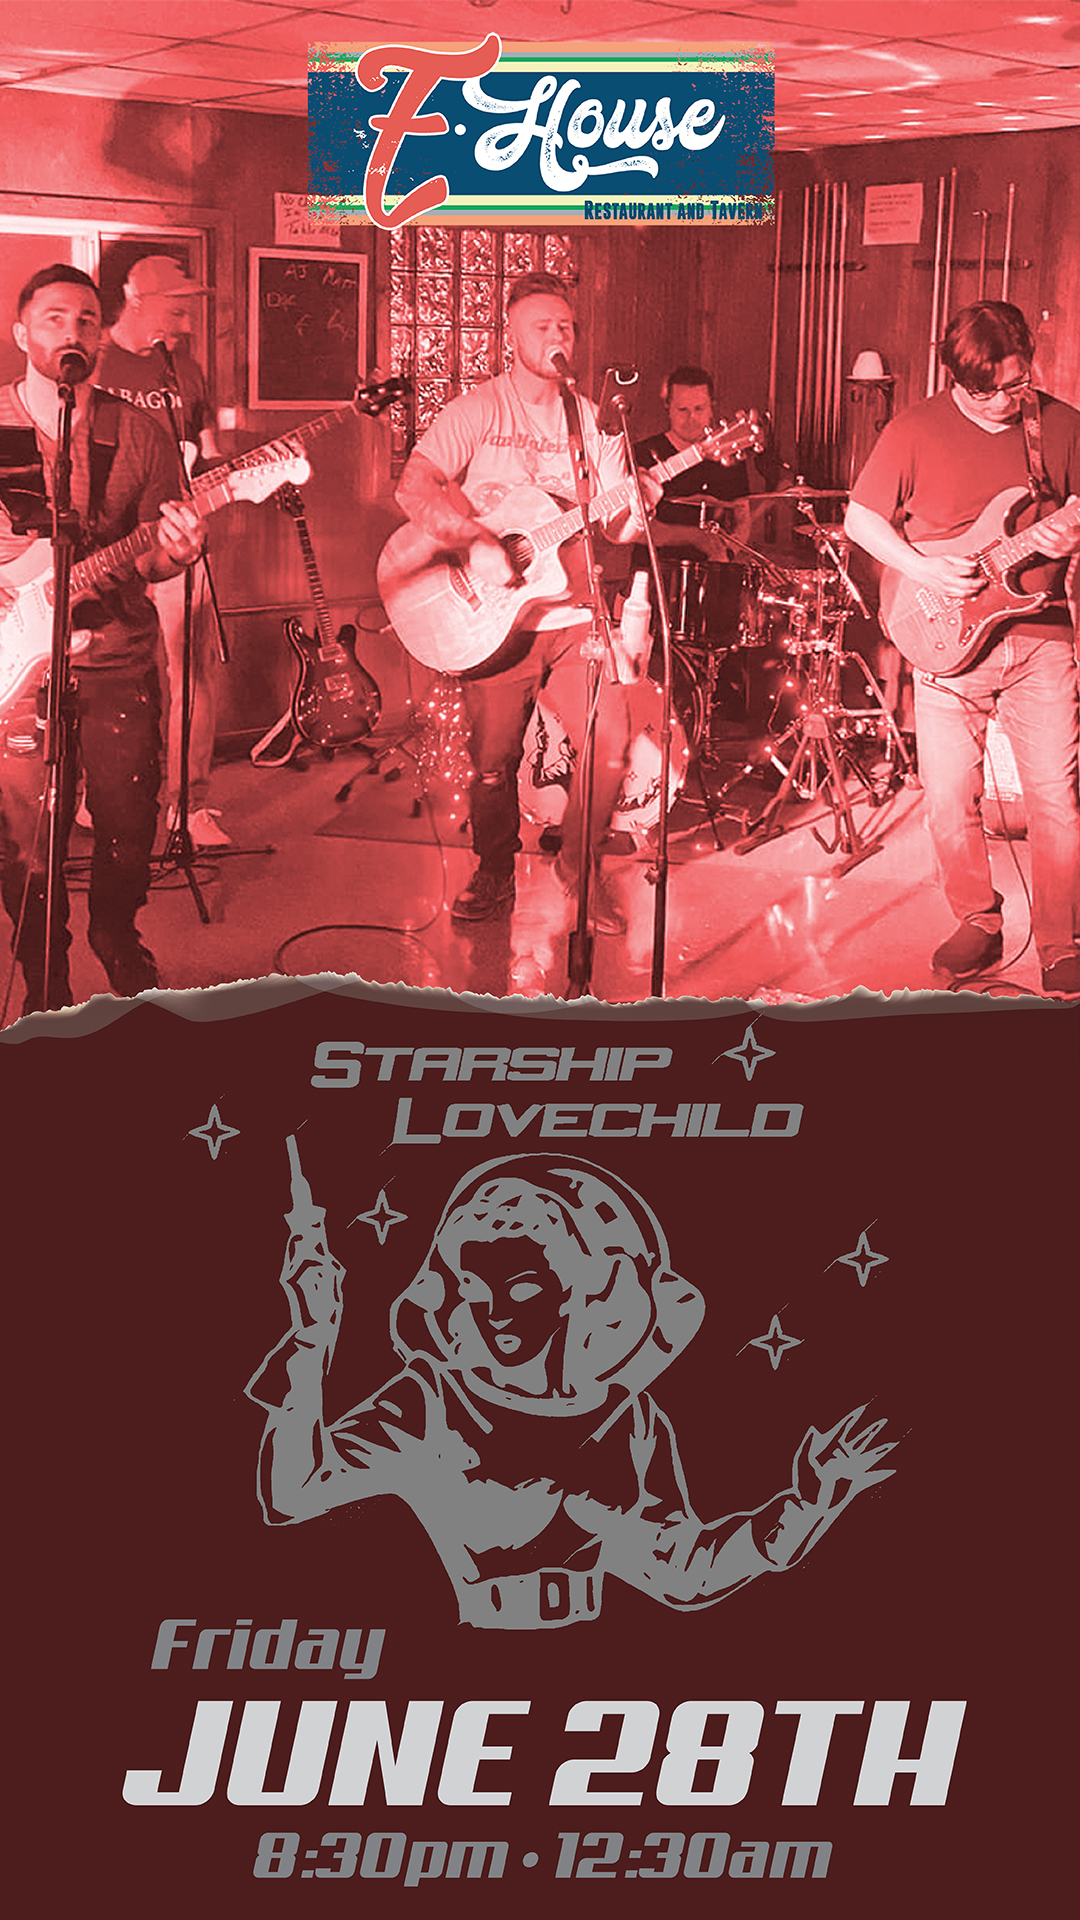 A band performs on stage with instruments at 7 House restaurant and tavern. The poster announces "Starship Lovechild" performing on Friday, June 28th from 8:30 PM to 12:30 AM.